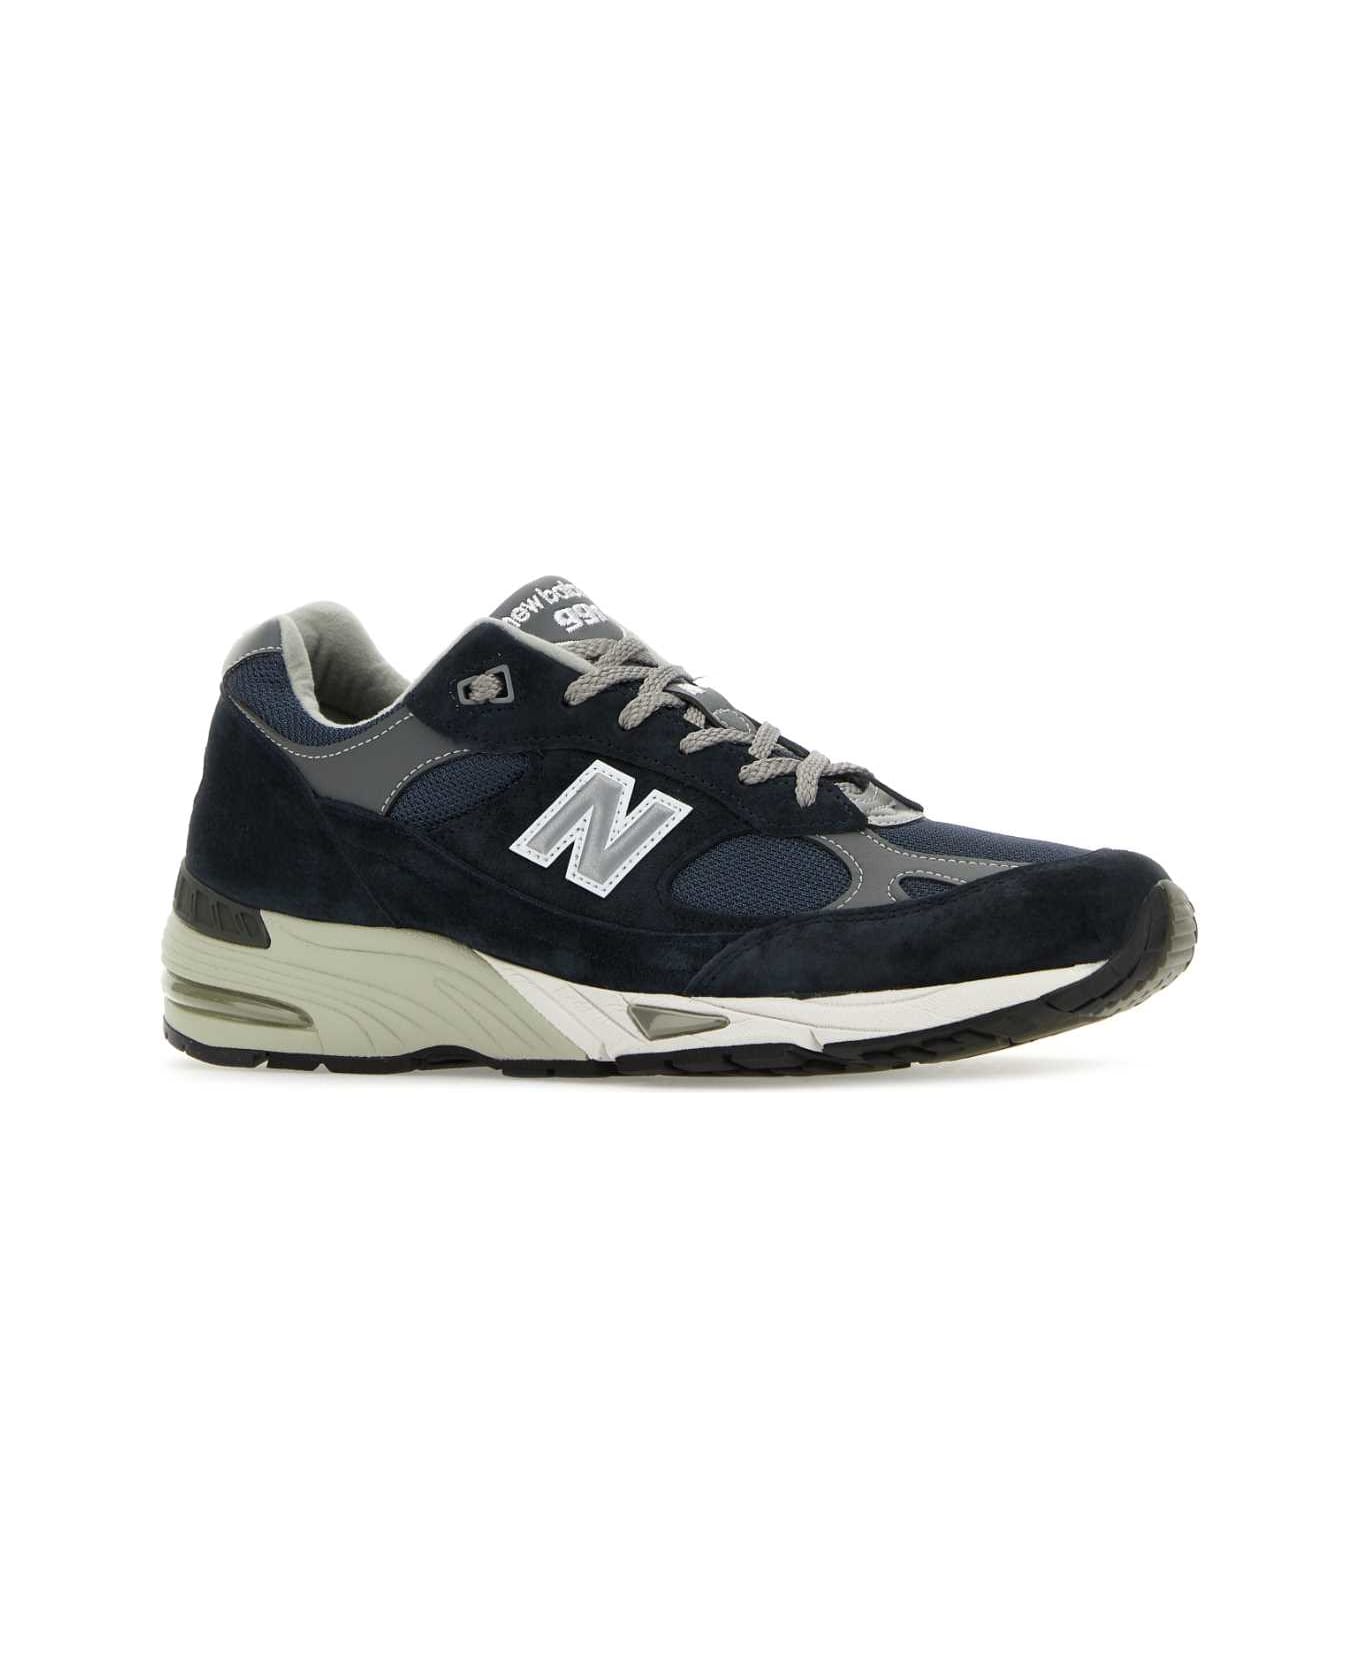 New Balance Two-tone Suede And Mesh 991 Sneakers - NAVY スニーカー